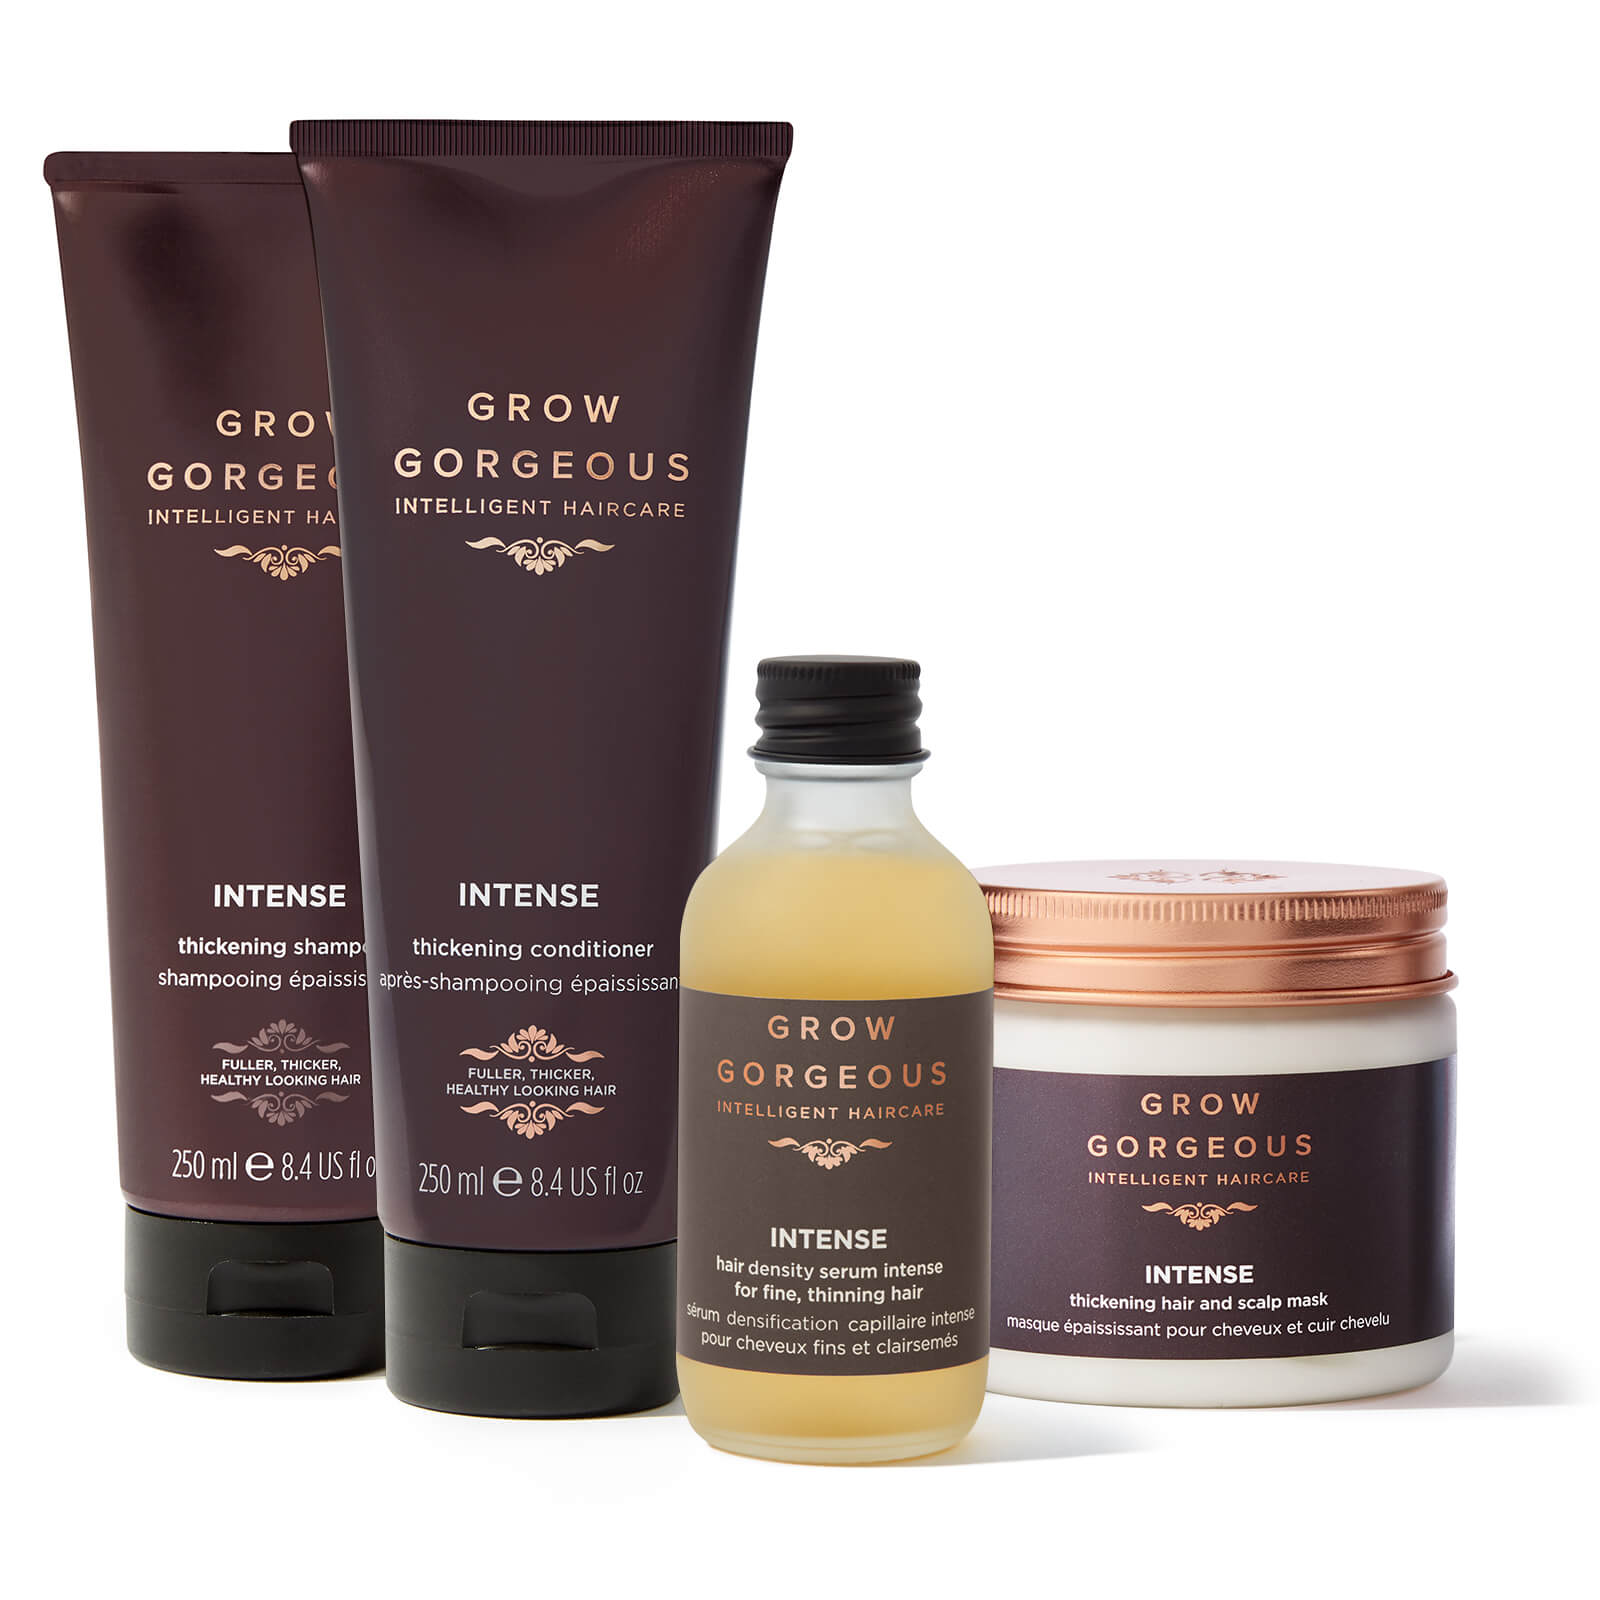 Grow Gorgeous Intense Collection (worth $118.00)